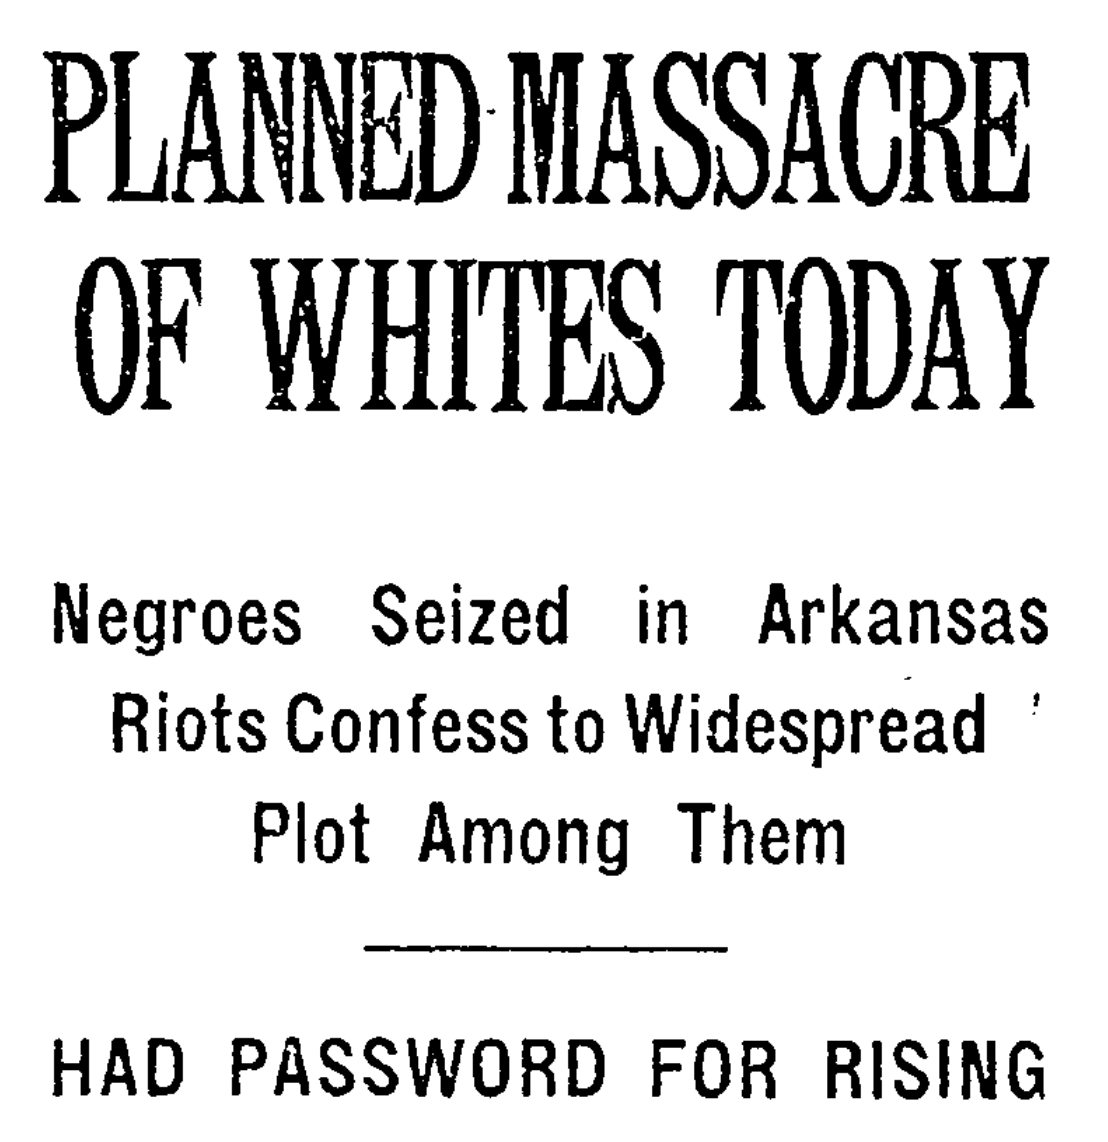 Mobs & police-led posses of white men chased down and murdered black sharecroppers. The National Guard was called in and, by some accounts, contributed to the slaughter. But you wouldn’t know this if you read only the “legacy media” accounts. (also NYT)